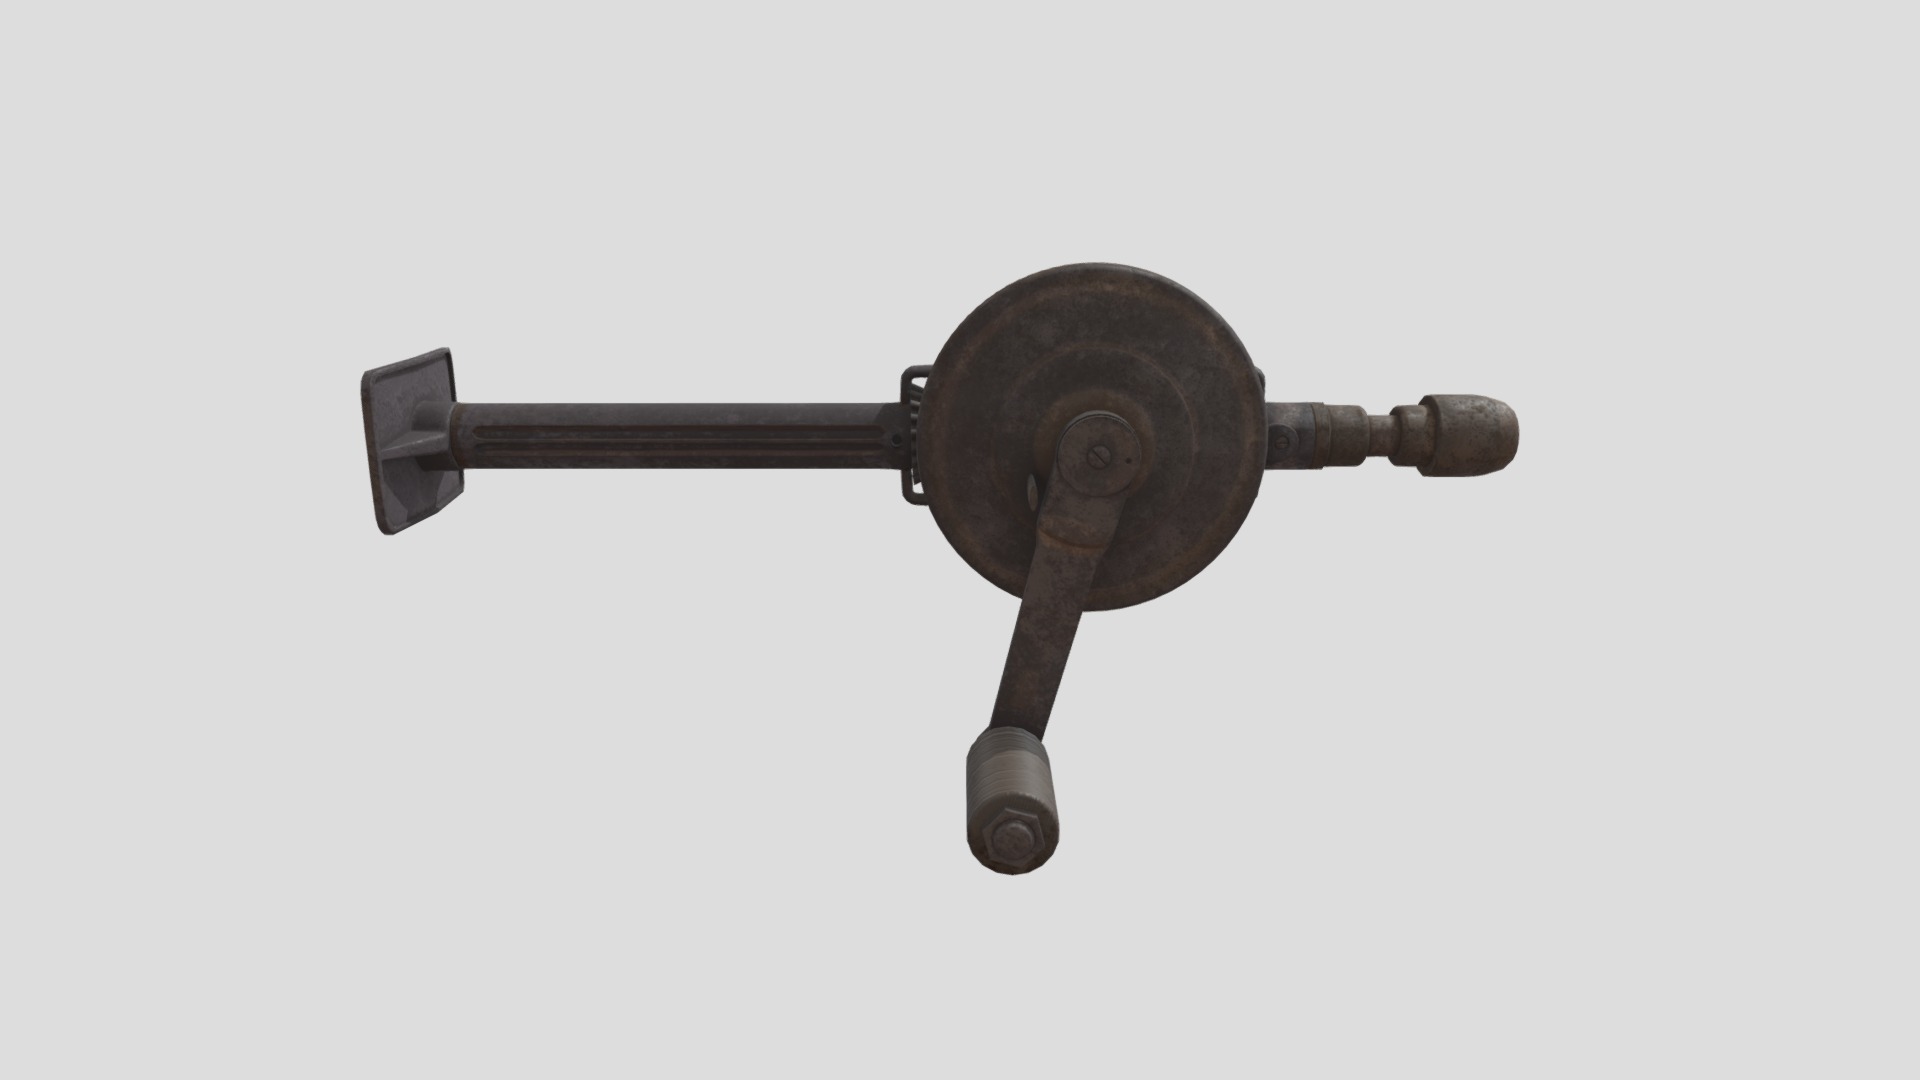 3D model Harrison_Anthony_Final_HandDrill - This is a 3D model of the Harrison_Anthony_Final_HandDrill. The 3D model is about a close-up of a telescope.